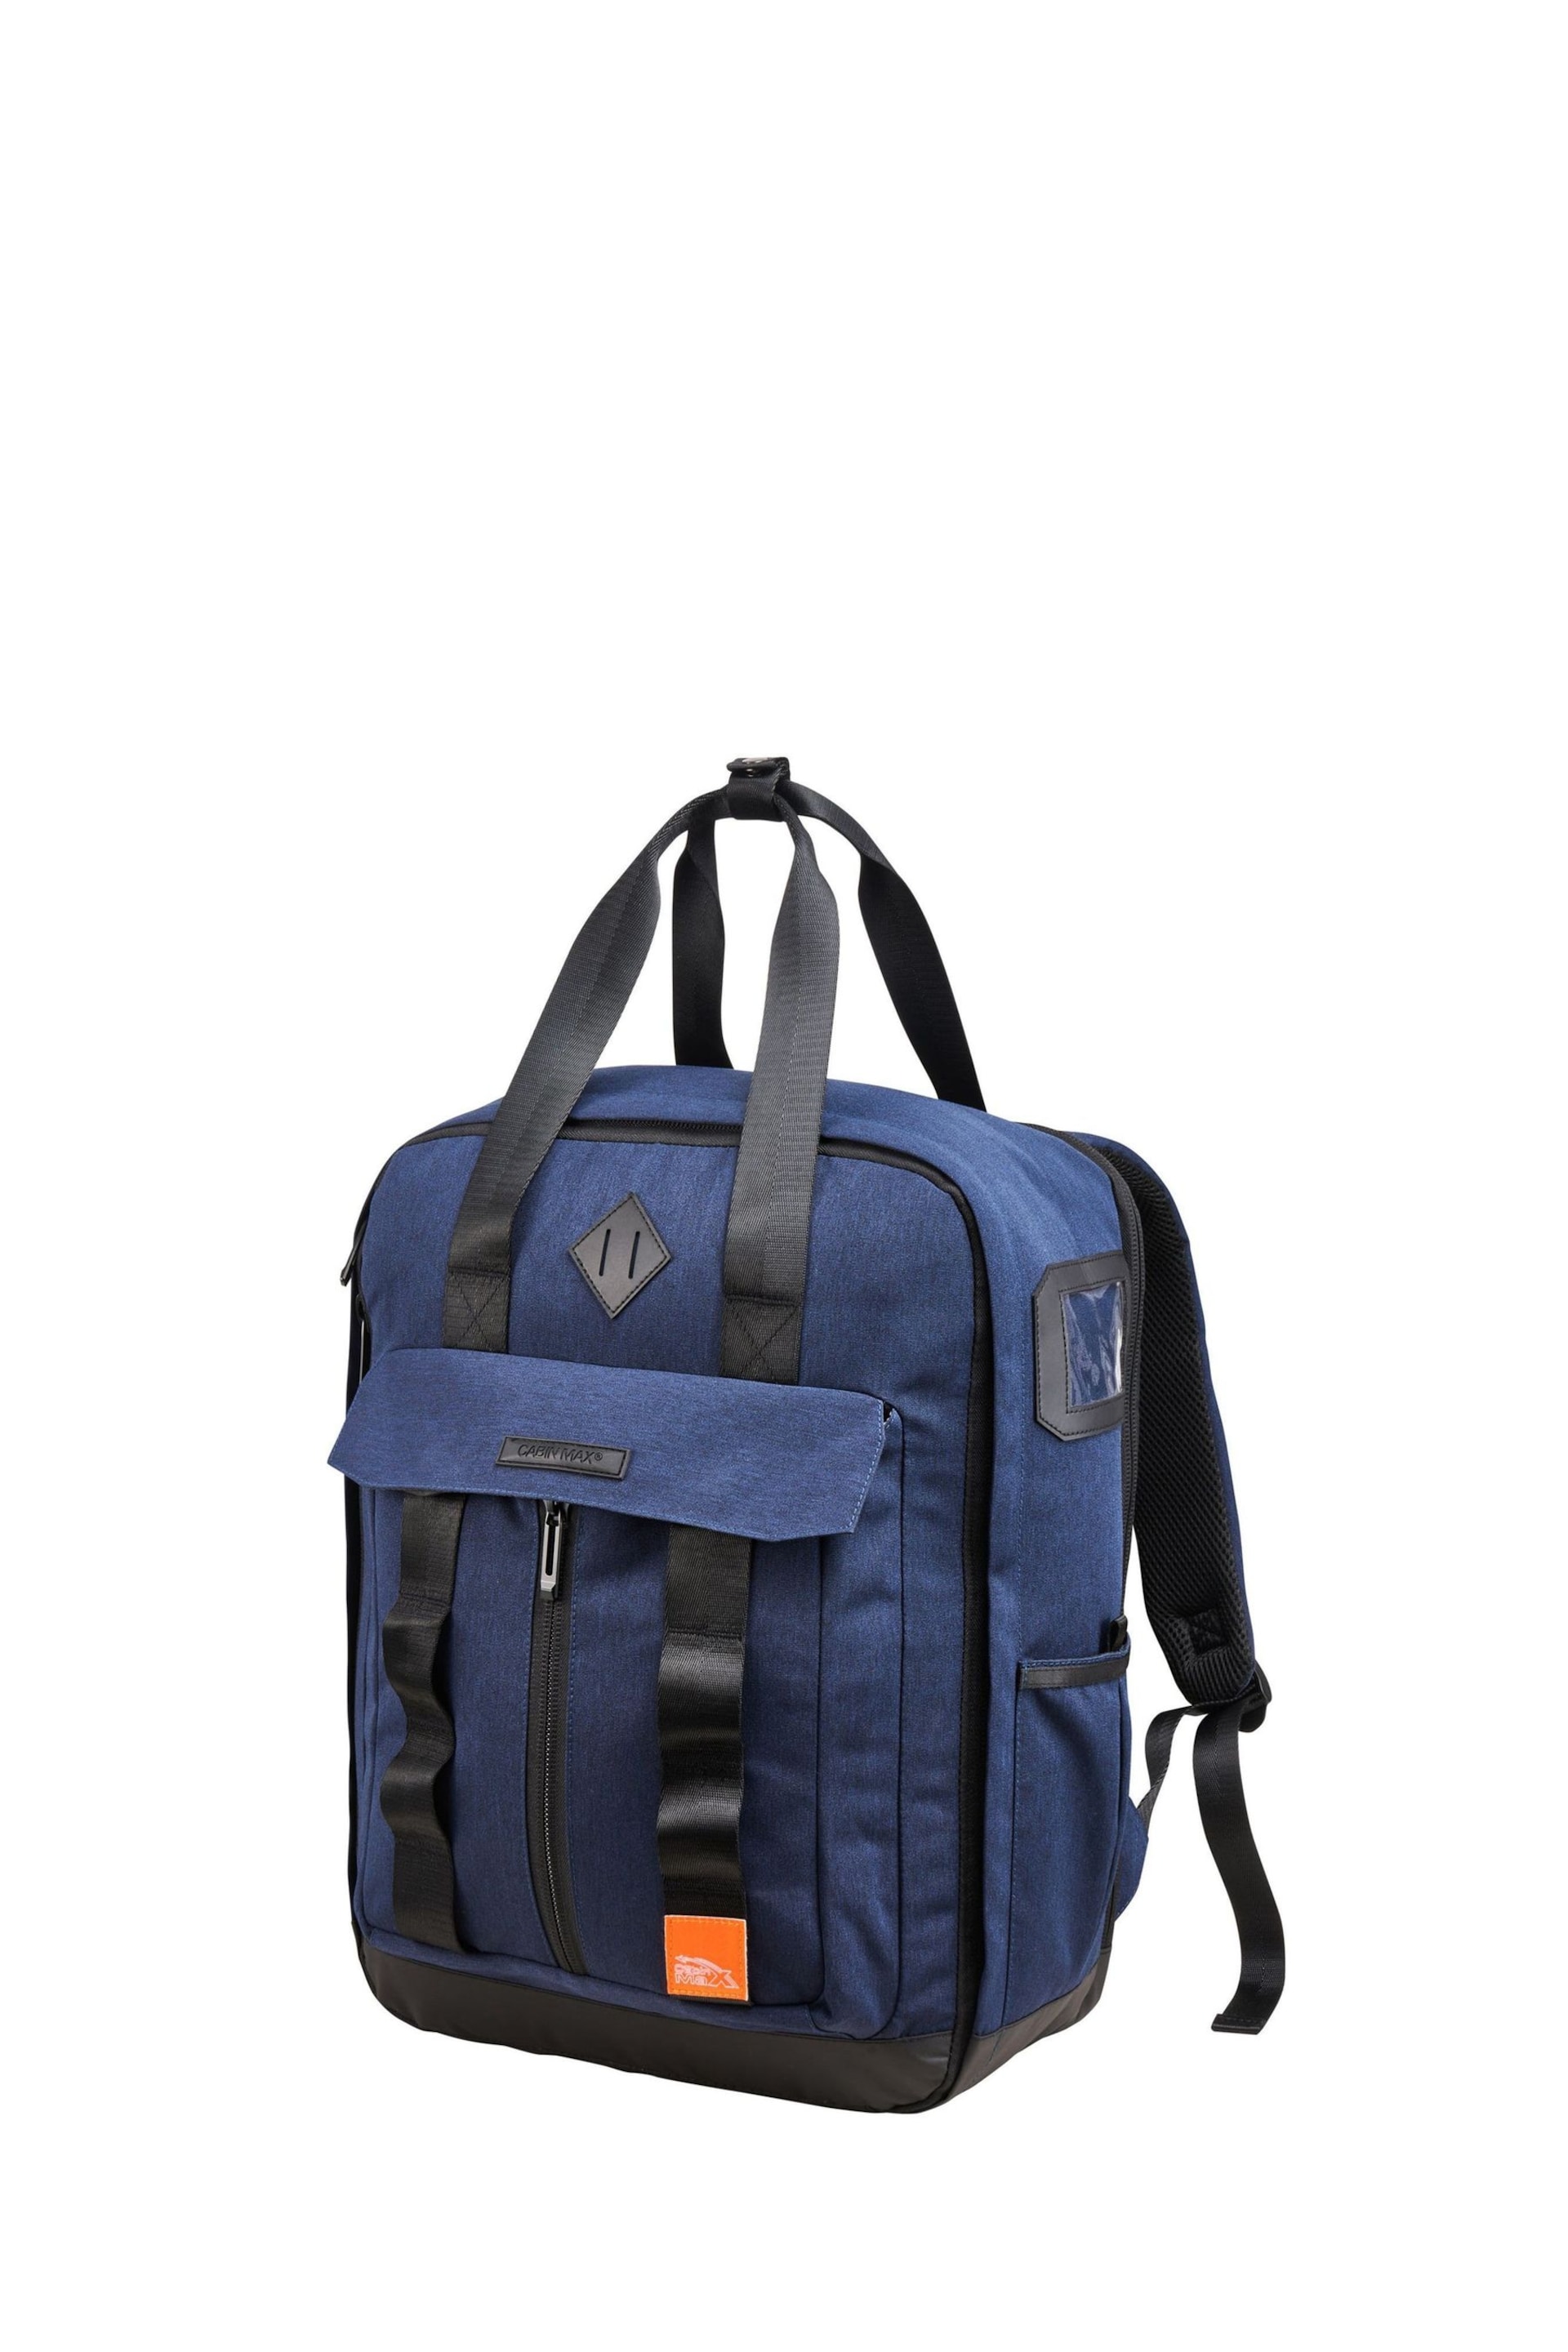 Cabin Max Memphis 24 Litre 40cm Travel Backpack - Image 1 of 7